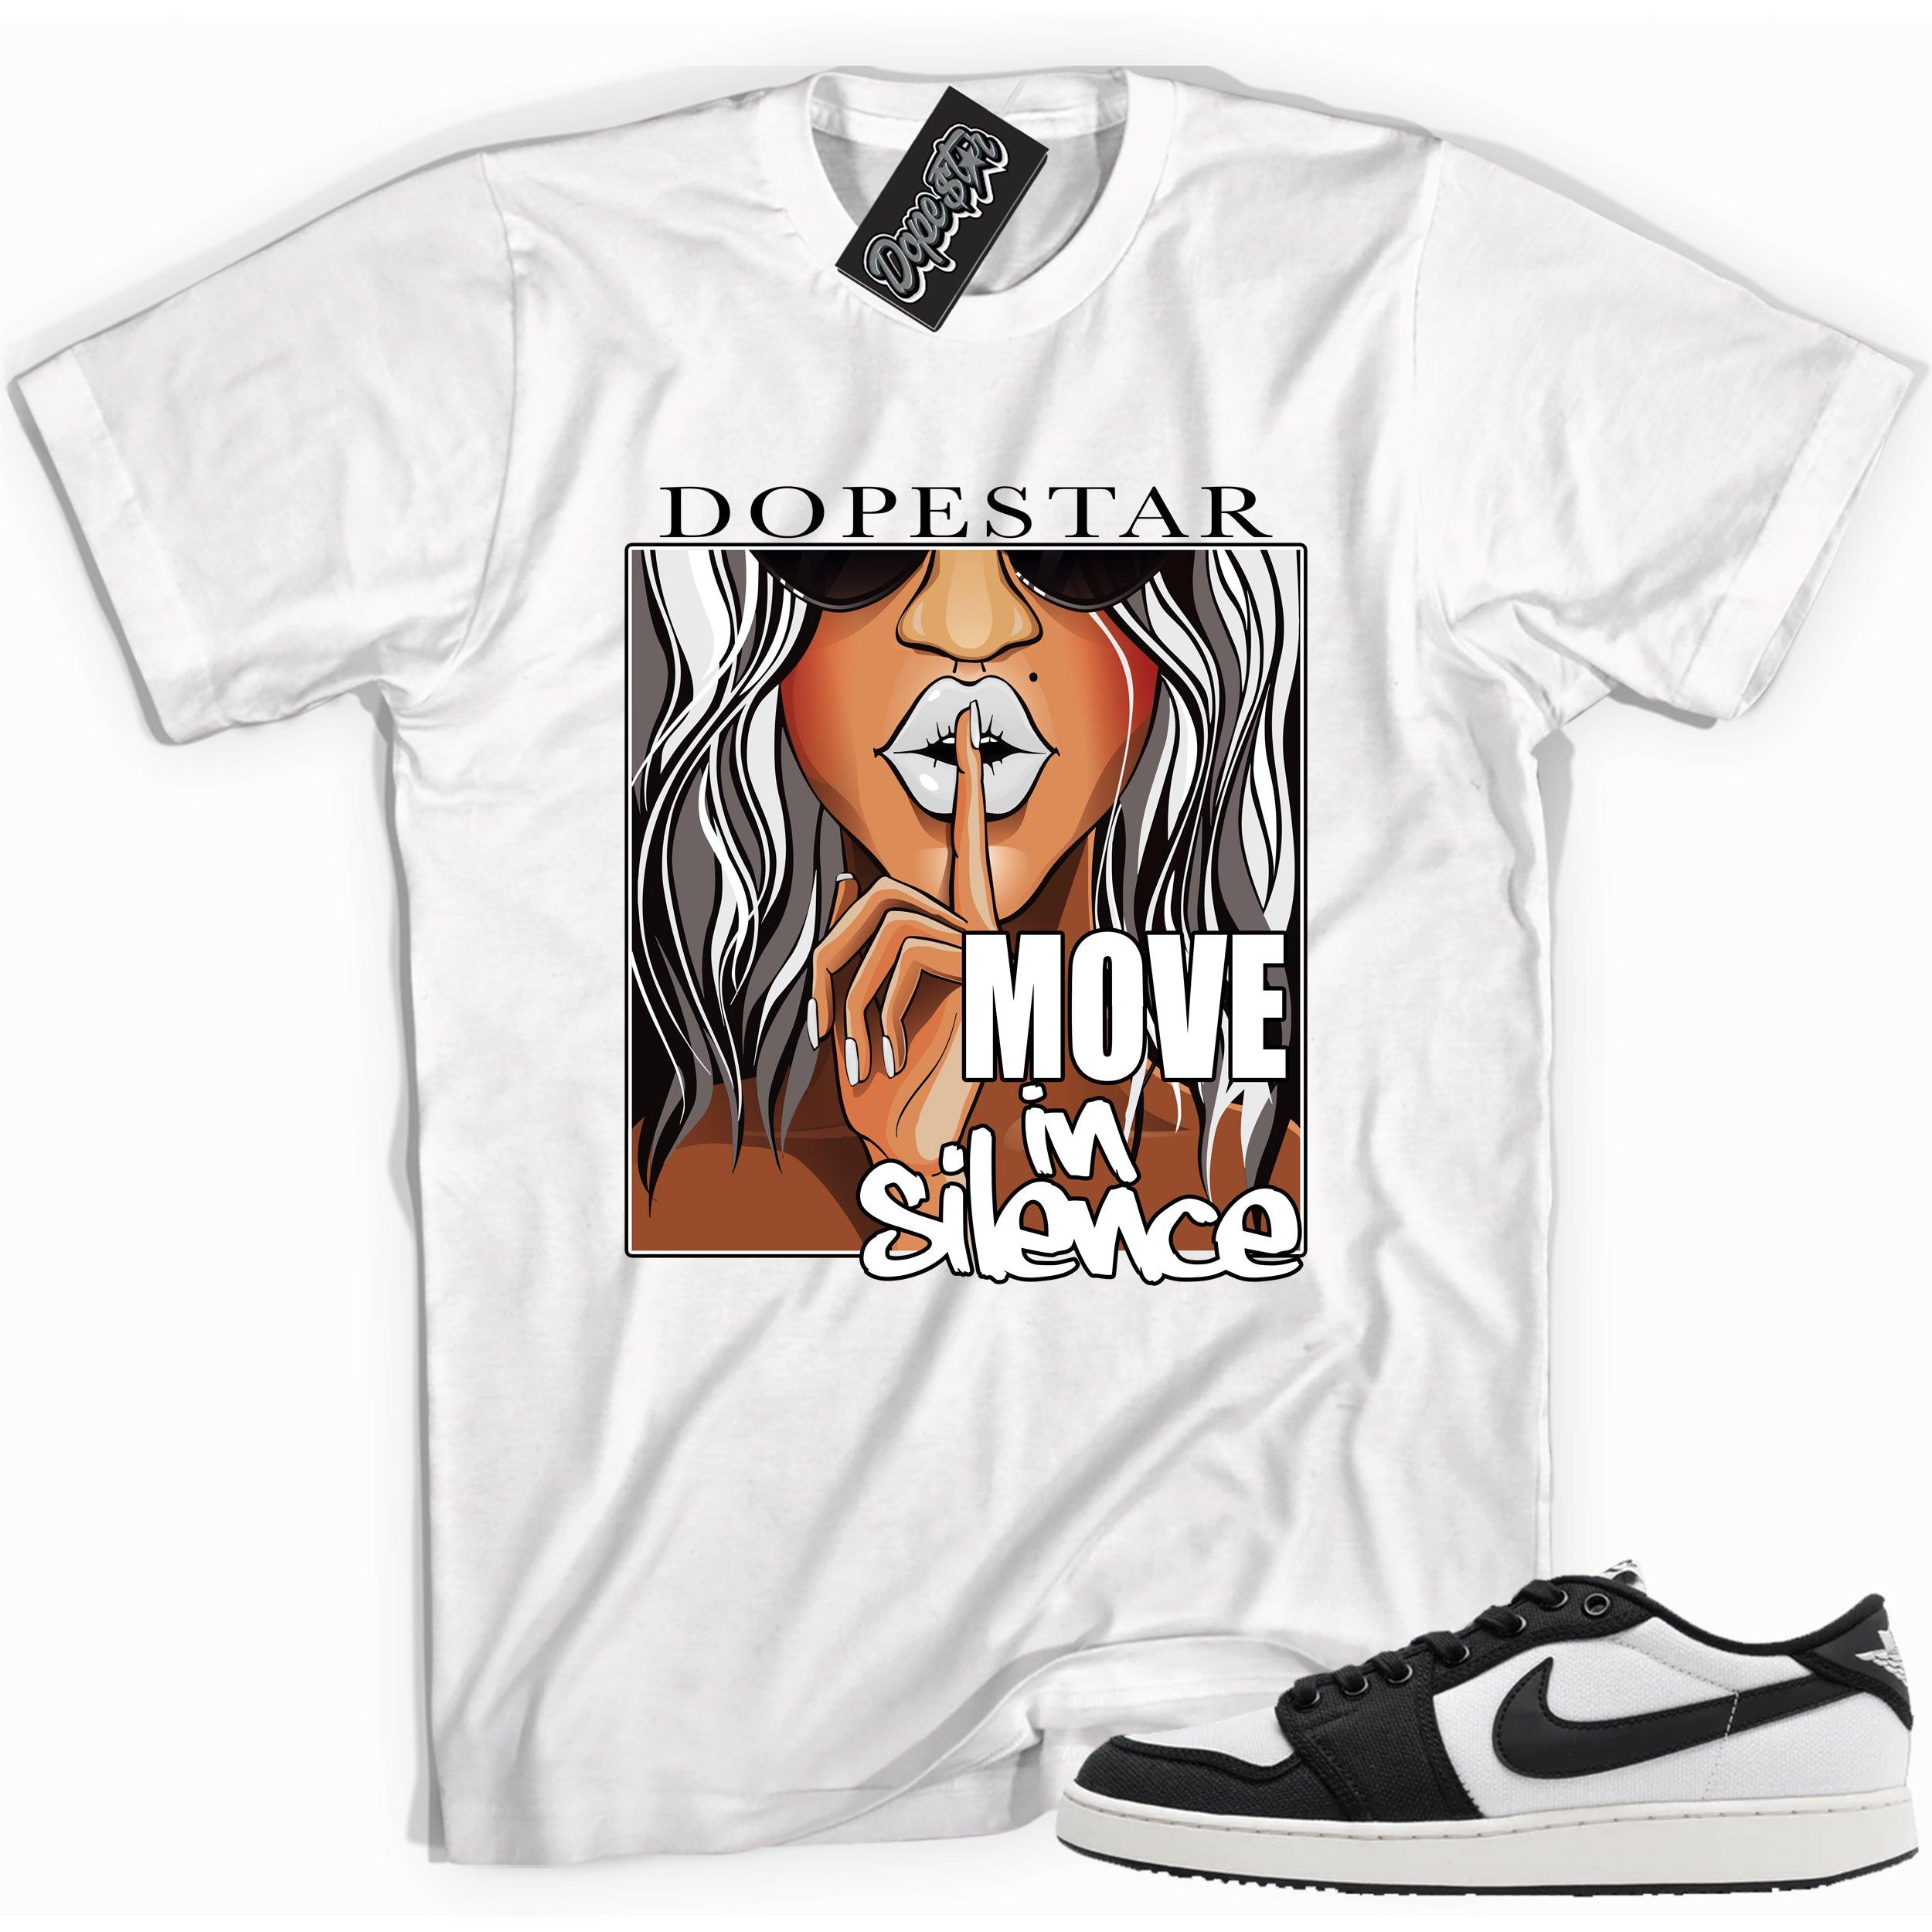 Cool white graphic tee with 'move in silence' print, that perfectly matches Air Jordan 1 Retro Ajko Low Black & White sneakers.